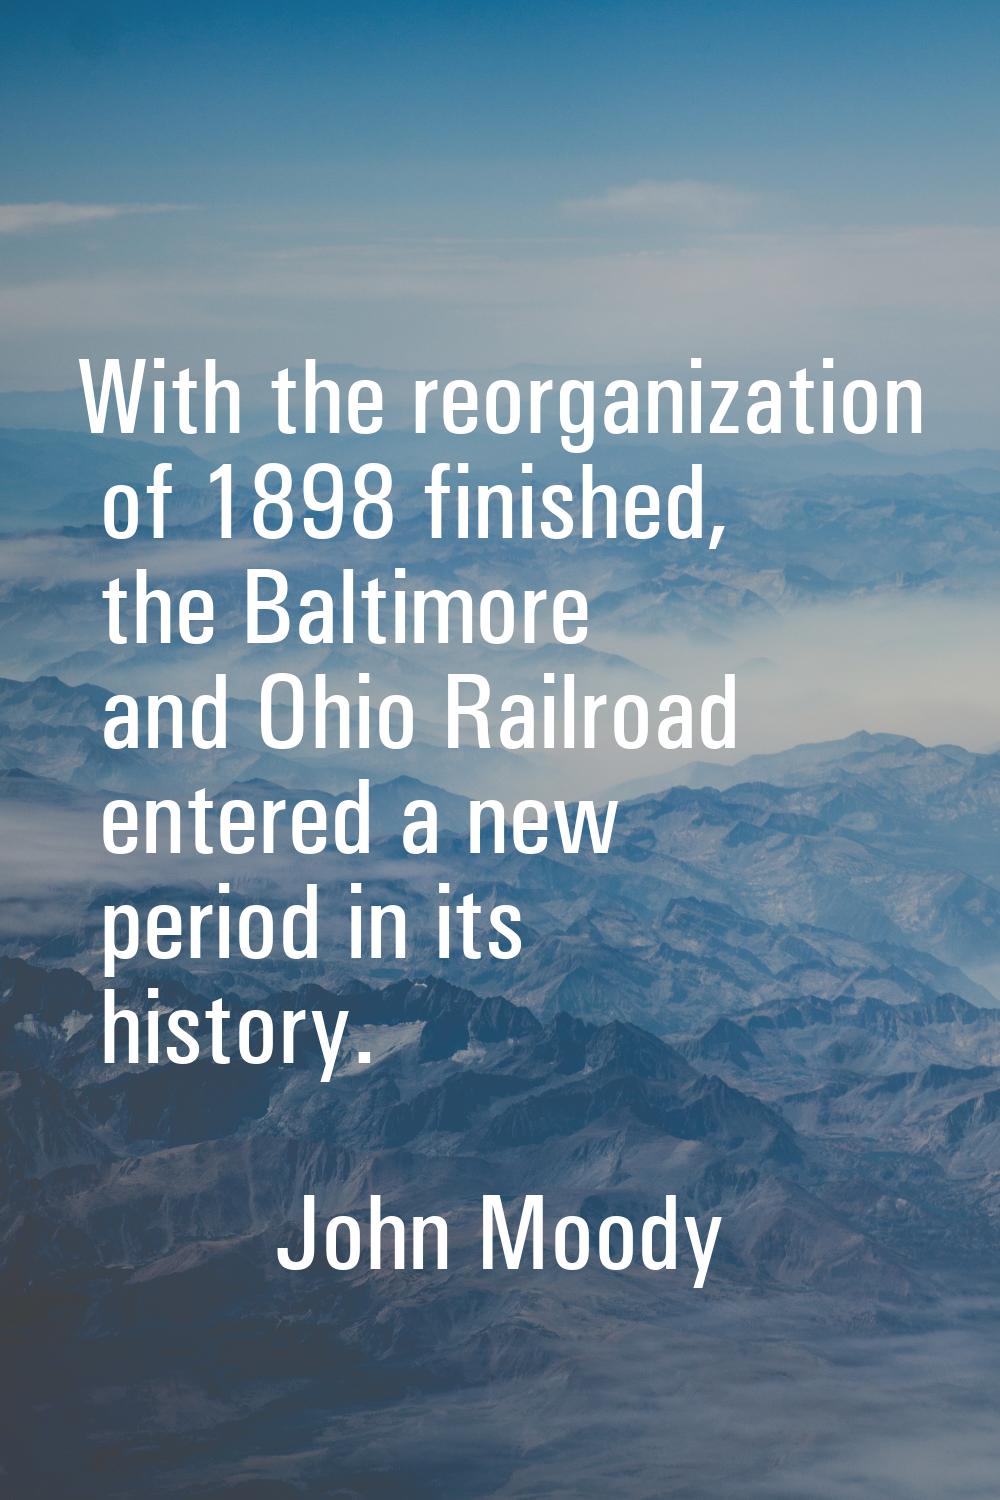 With the reorganization of 1898 finished, the Baltimore and Ohio Railroad entered a new period in i